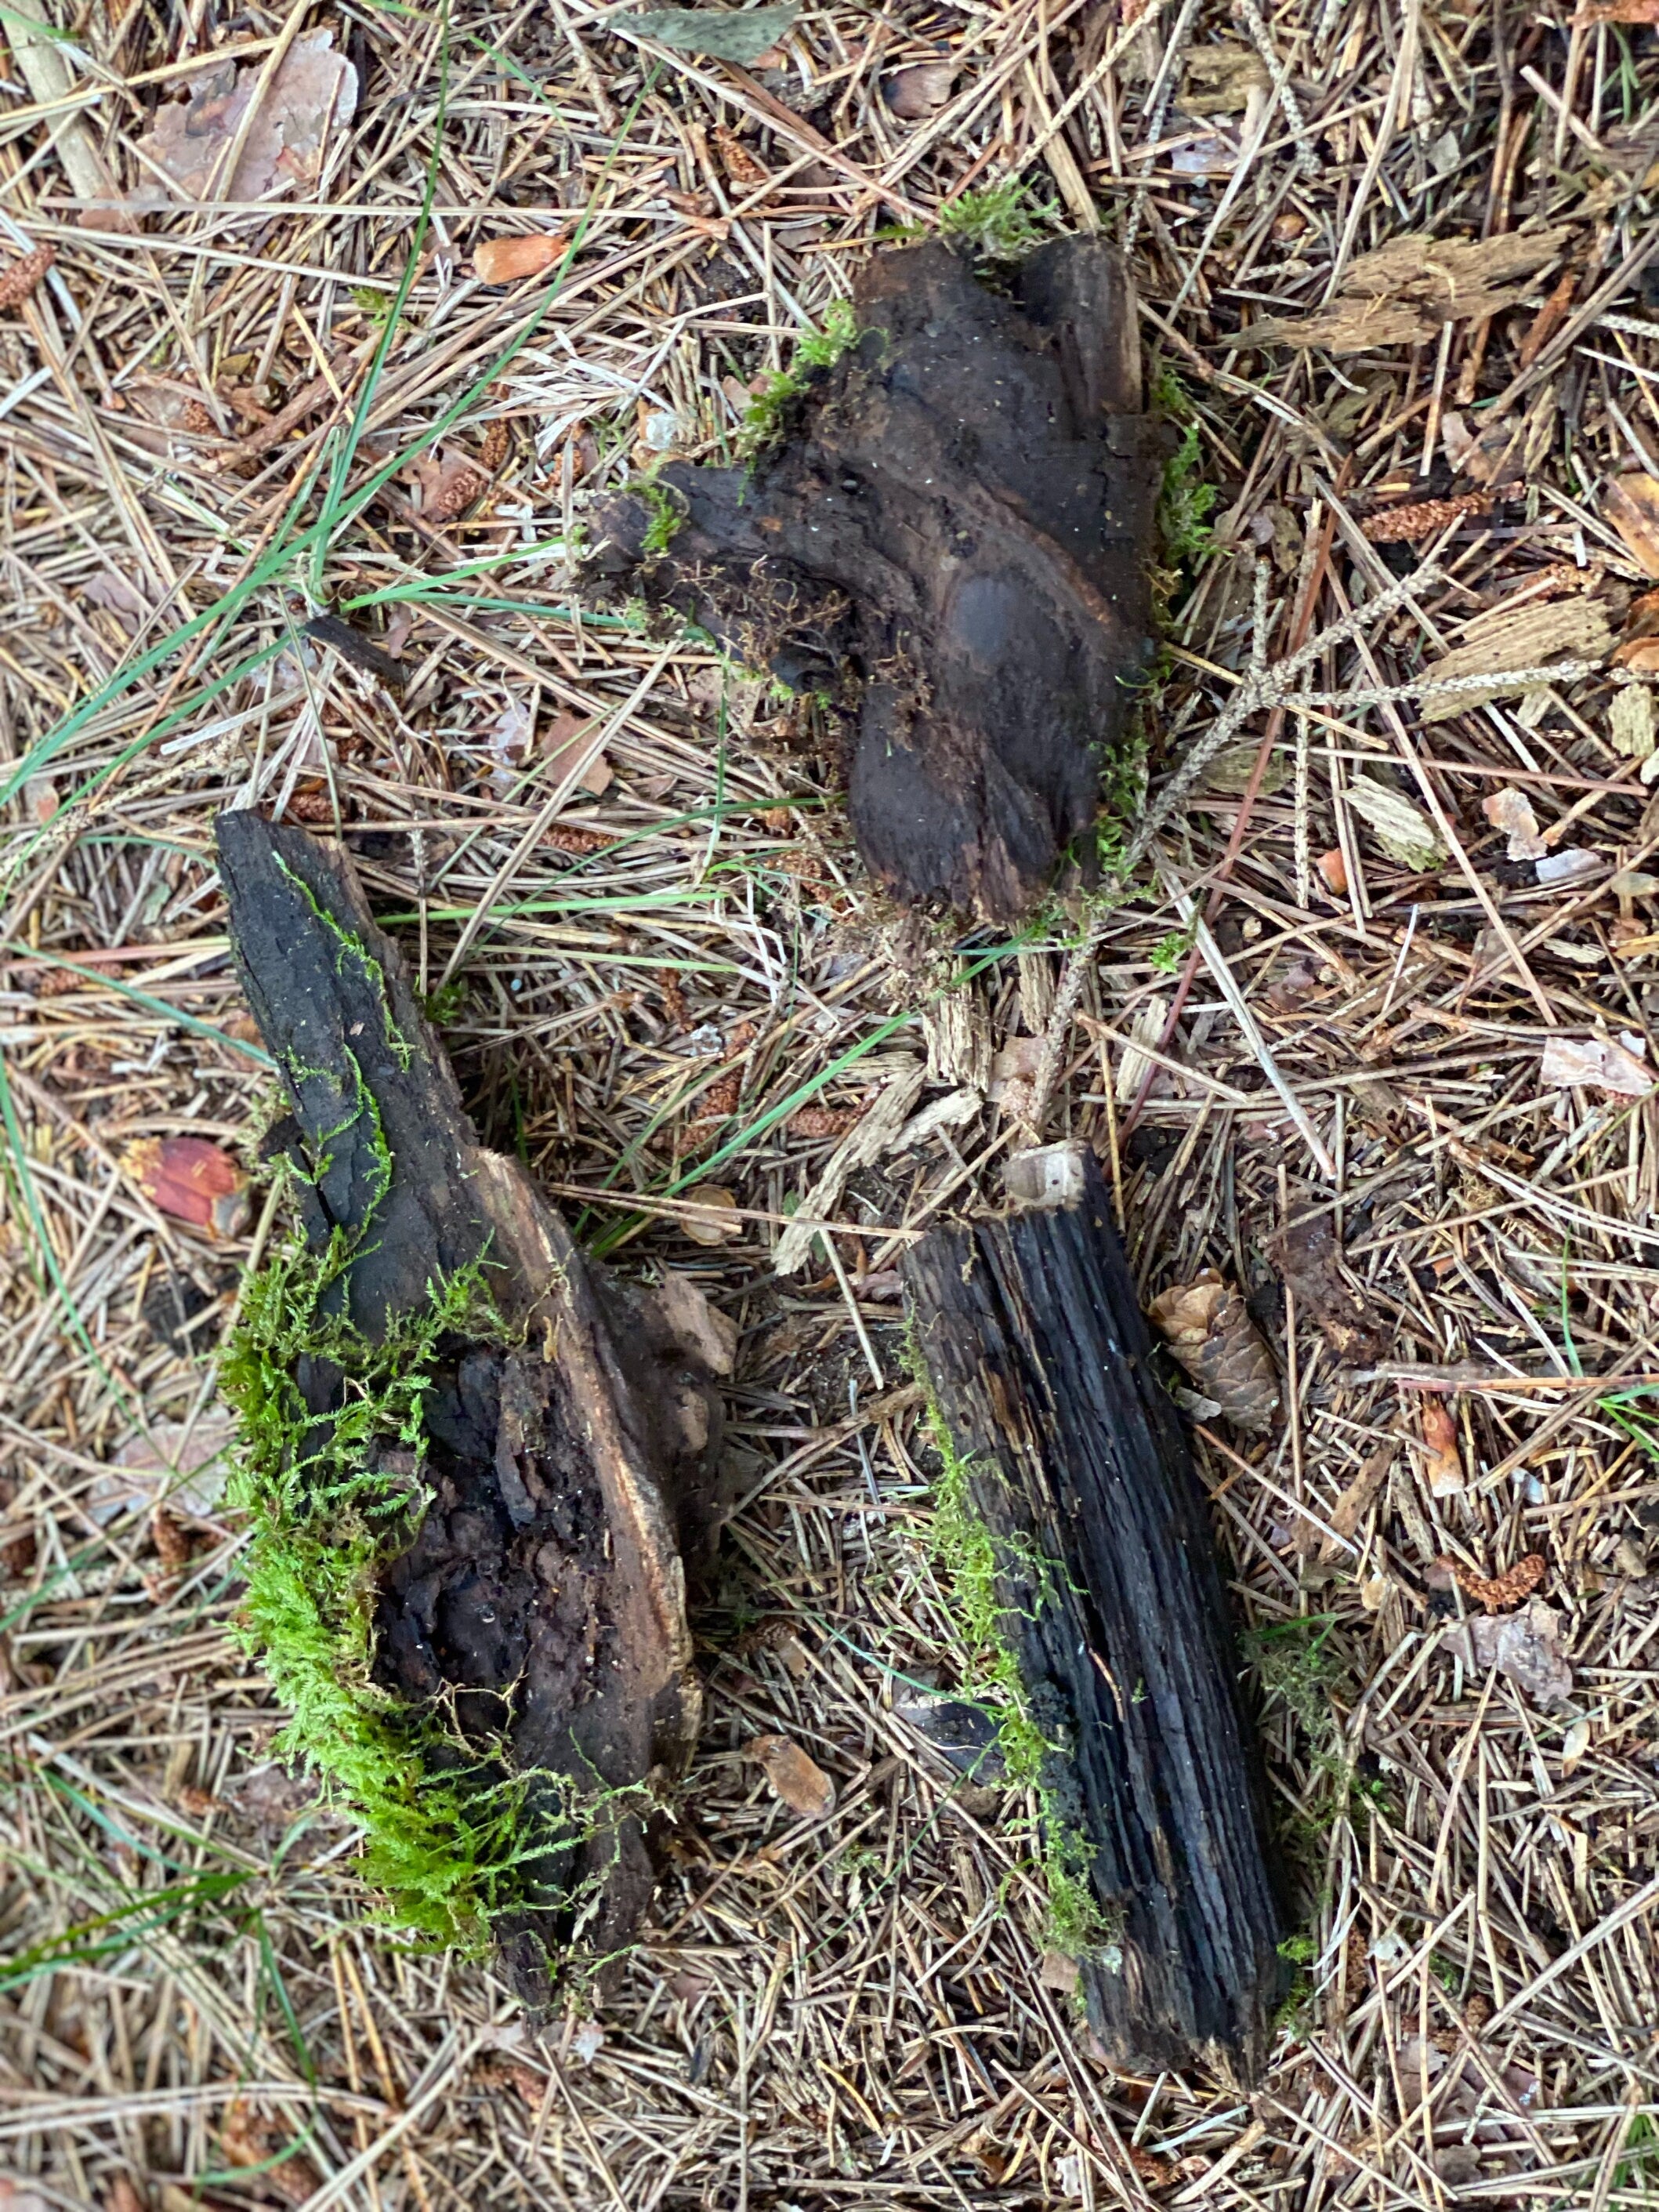 Three Moss Covered Sticks, Mossy Sticks, 4-7 Inches Long by 1-3 Inches Wide and 1-2 Inches High